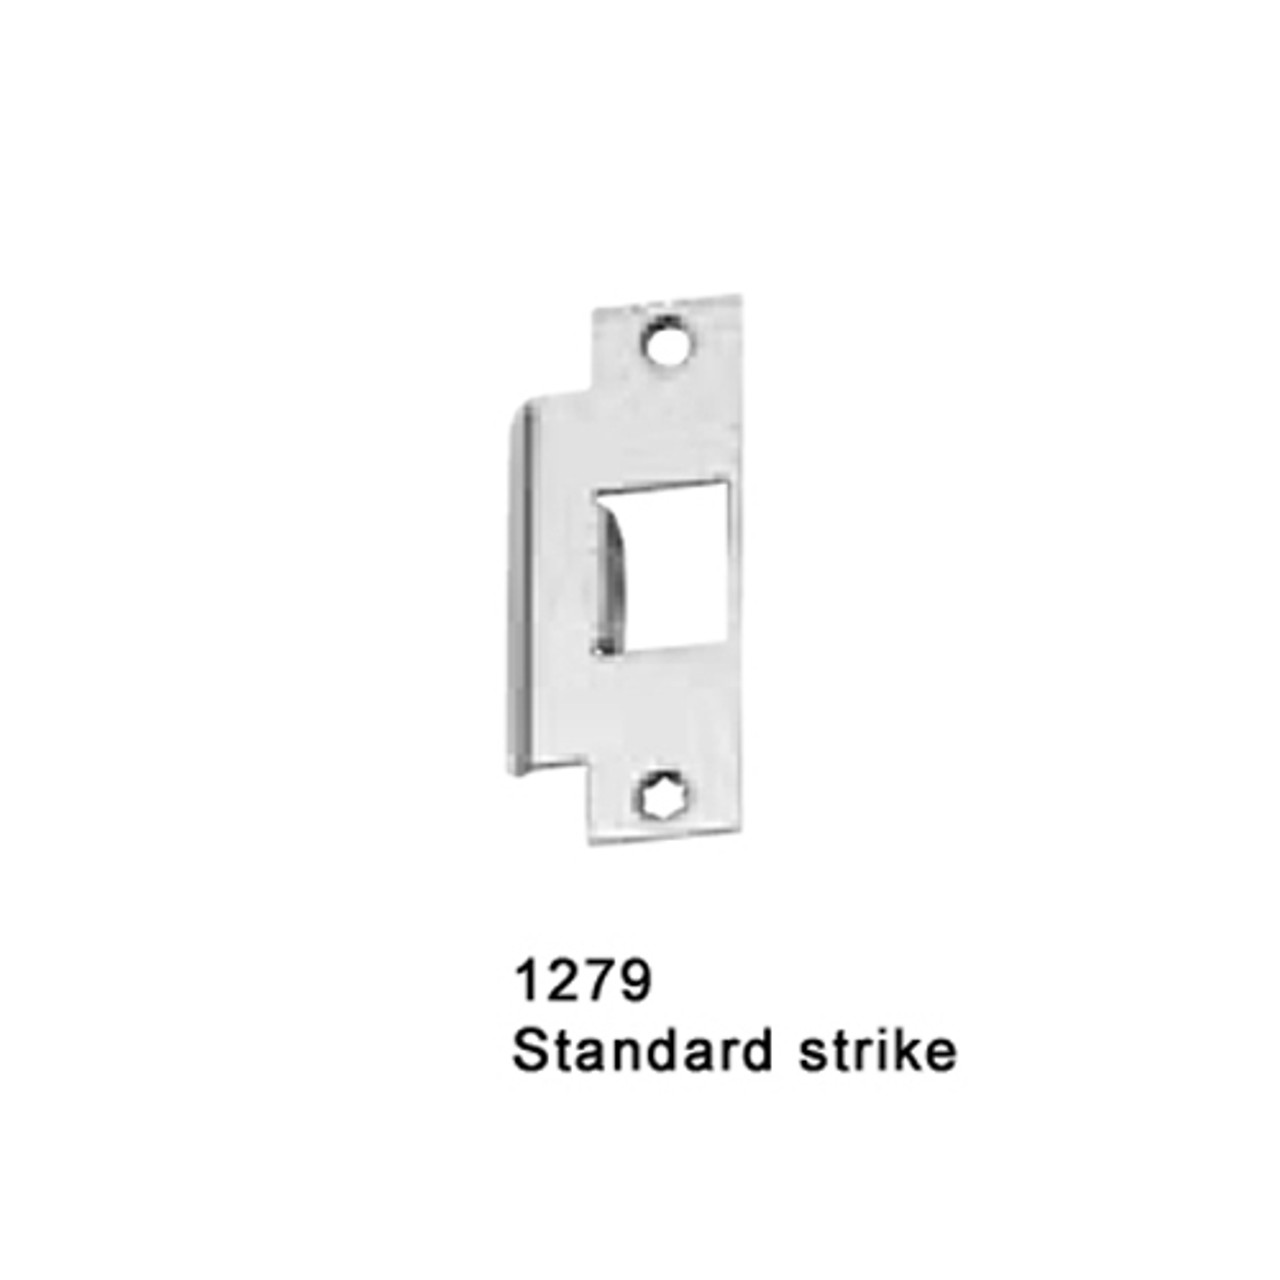 CD25-M-L-DANE-US32D-4-RHR Falcon 25 Series Mortise Lock Devices with 510L Dane Lever Trim in Satin Stainless Steel